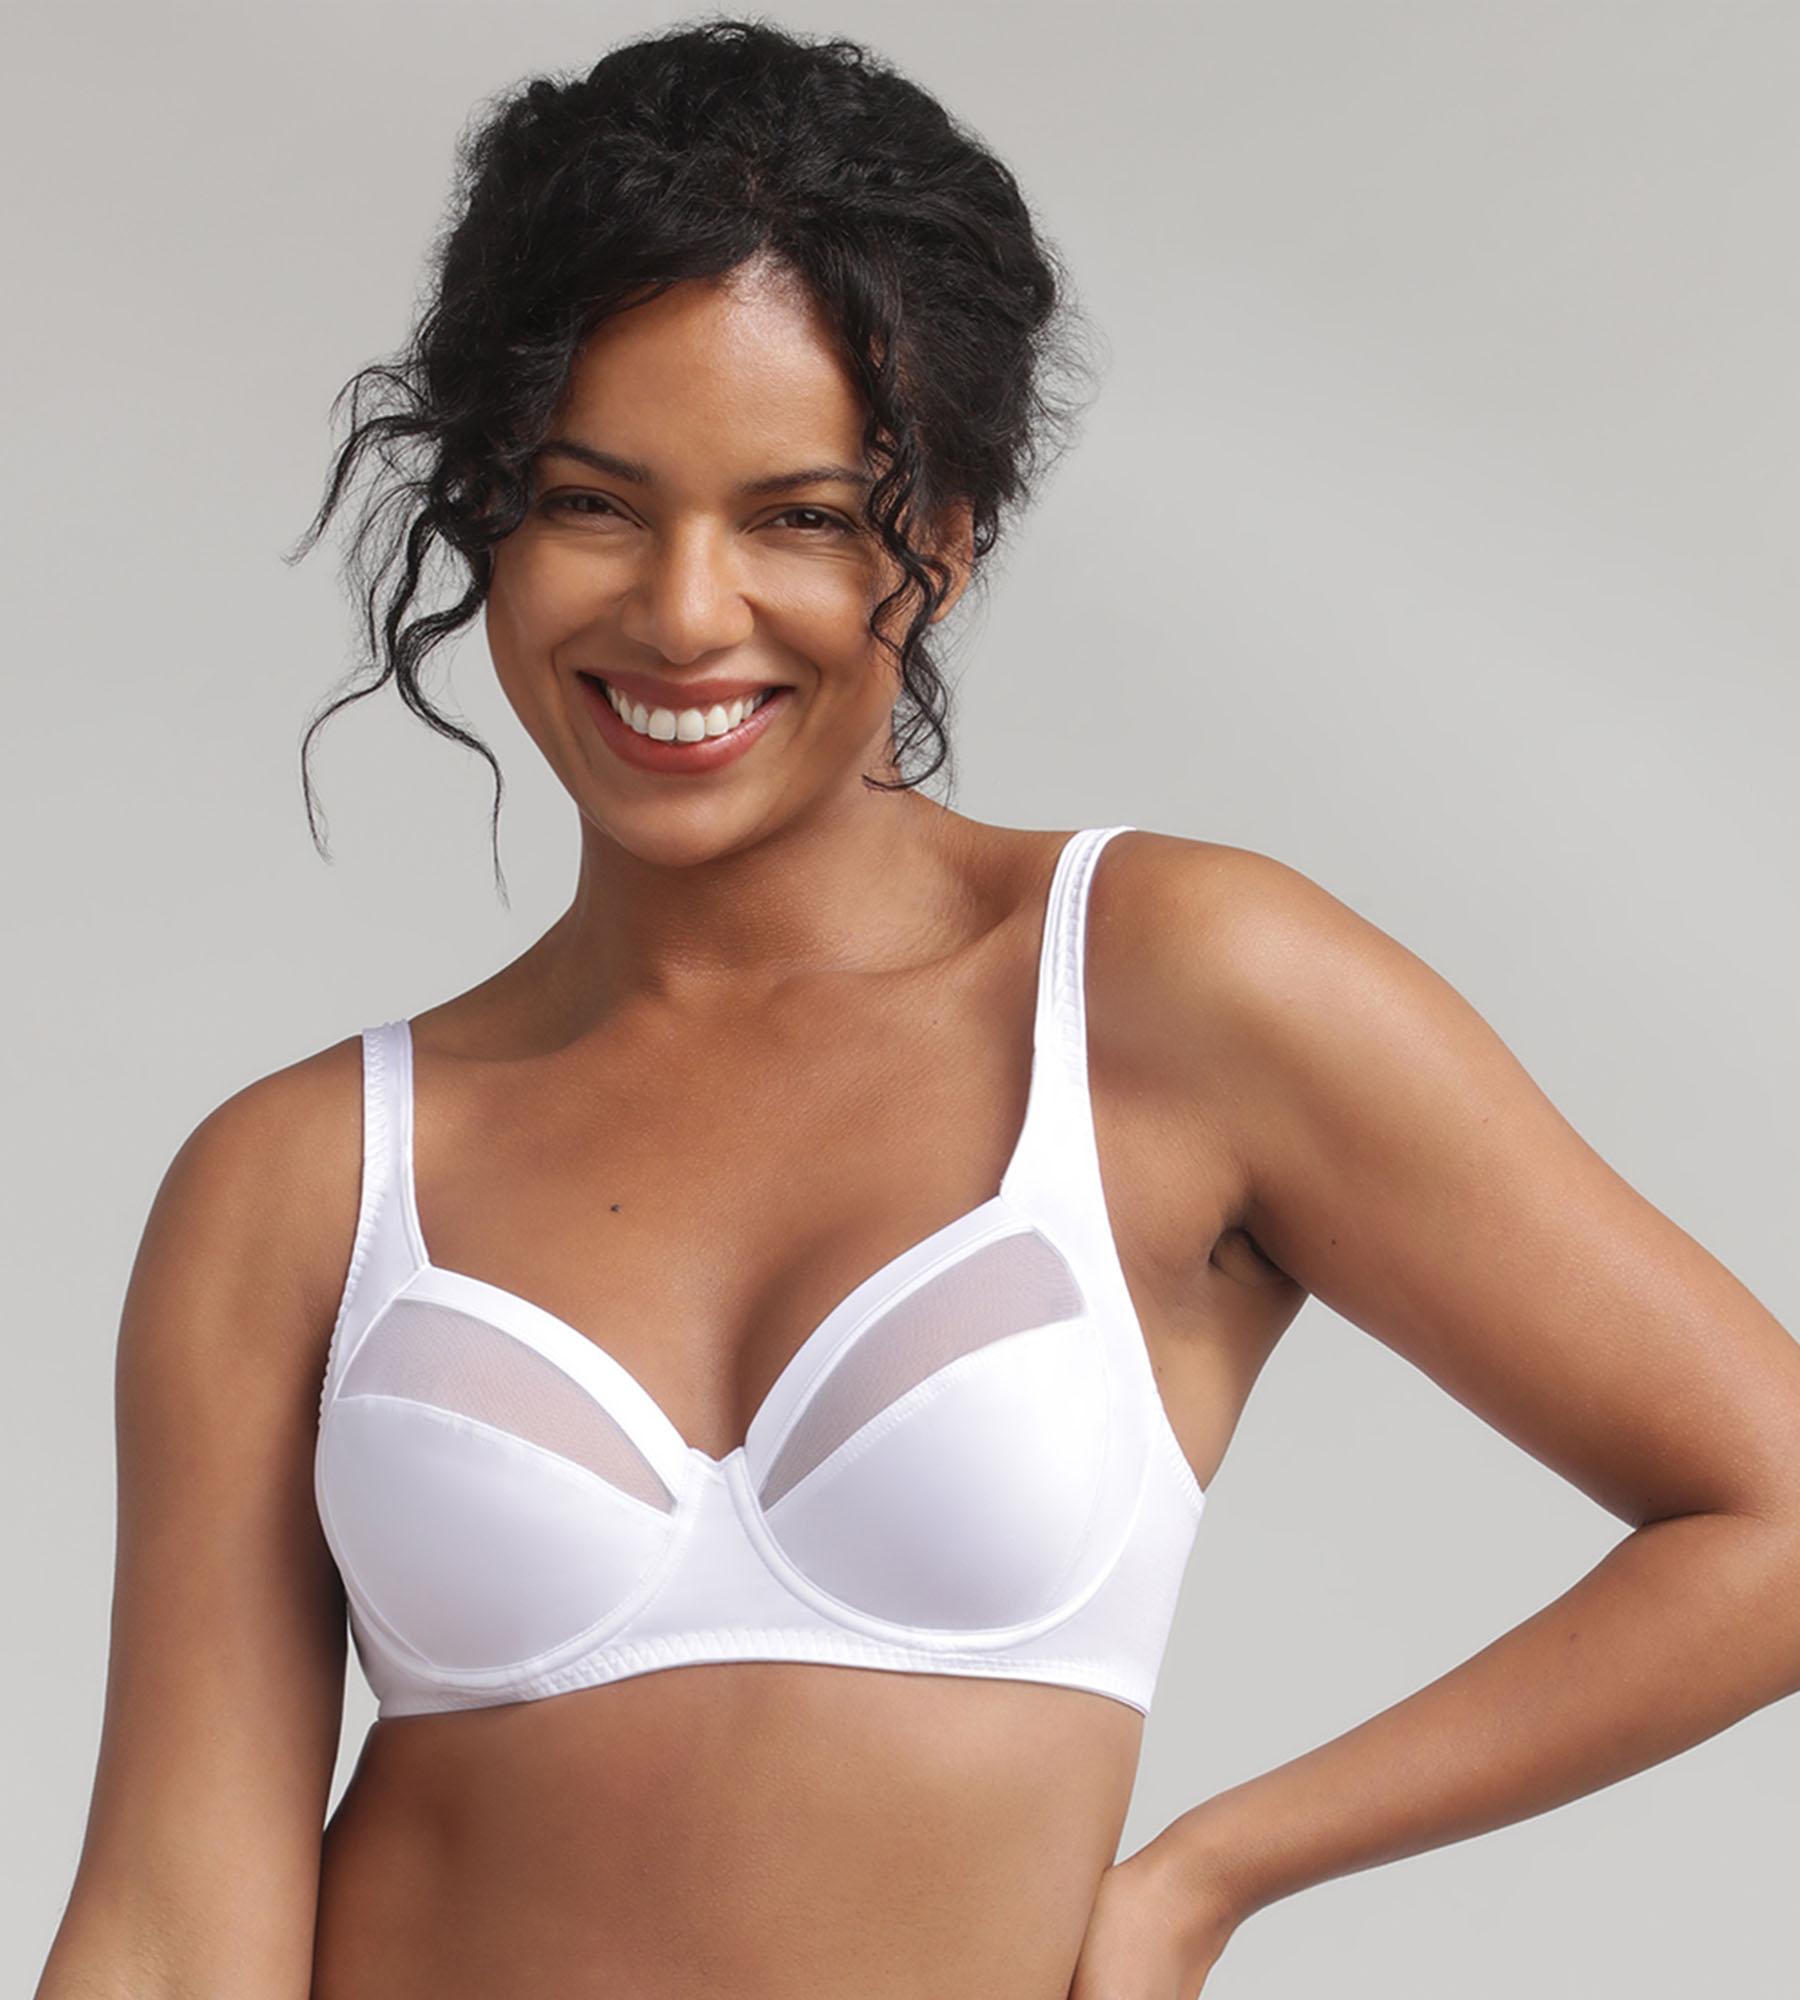 Soutien-gorge emboîtant tulle blanc Perfect Silhouette, , PLAYTEX